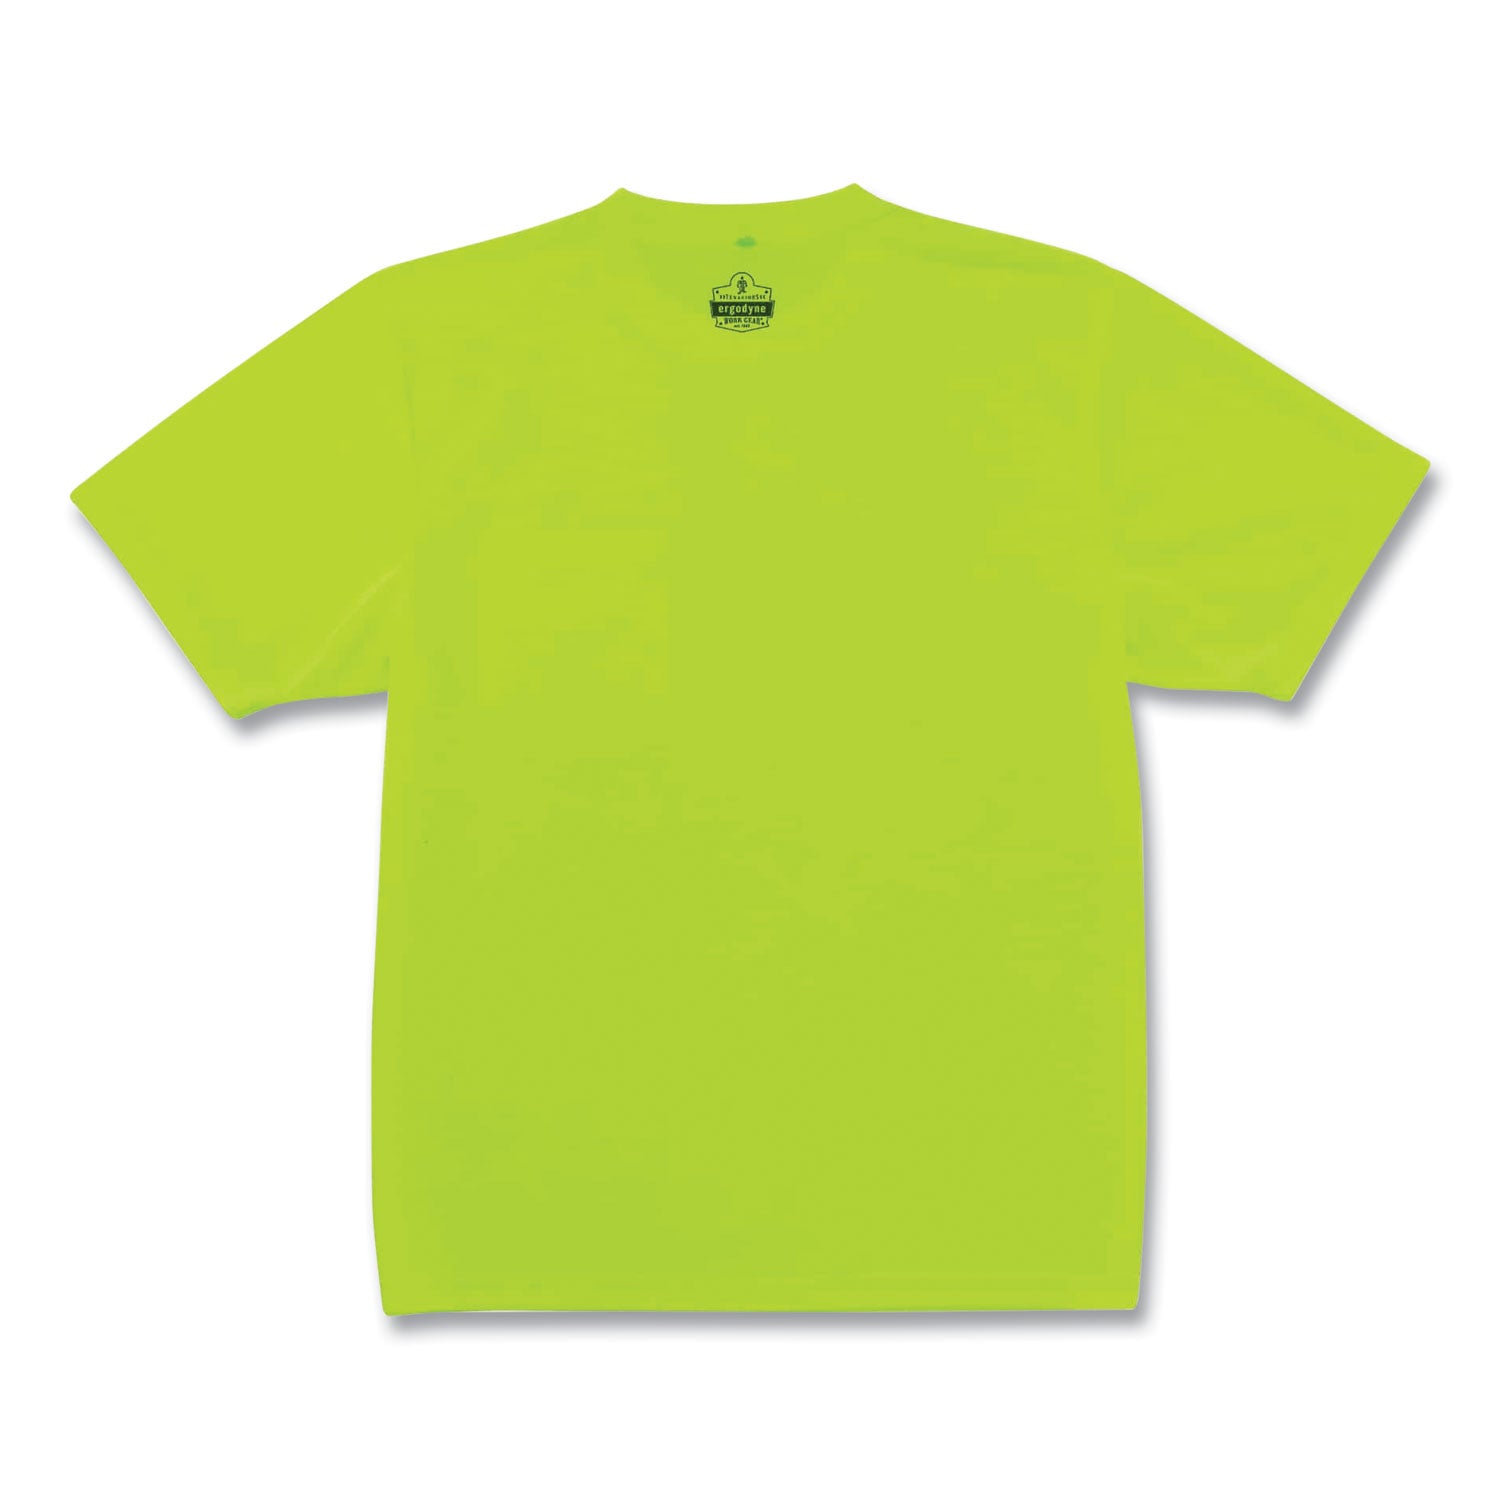 glowear-8089-non-certified-hi-vis-t-shirt-polyester-2x-large-lime-ships-in-1-3-business-days_ego21556 - 1